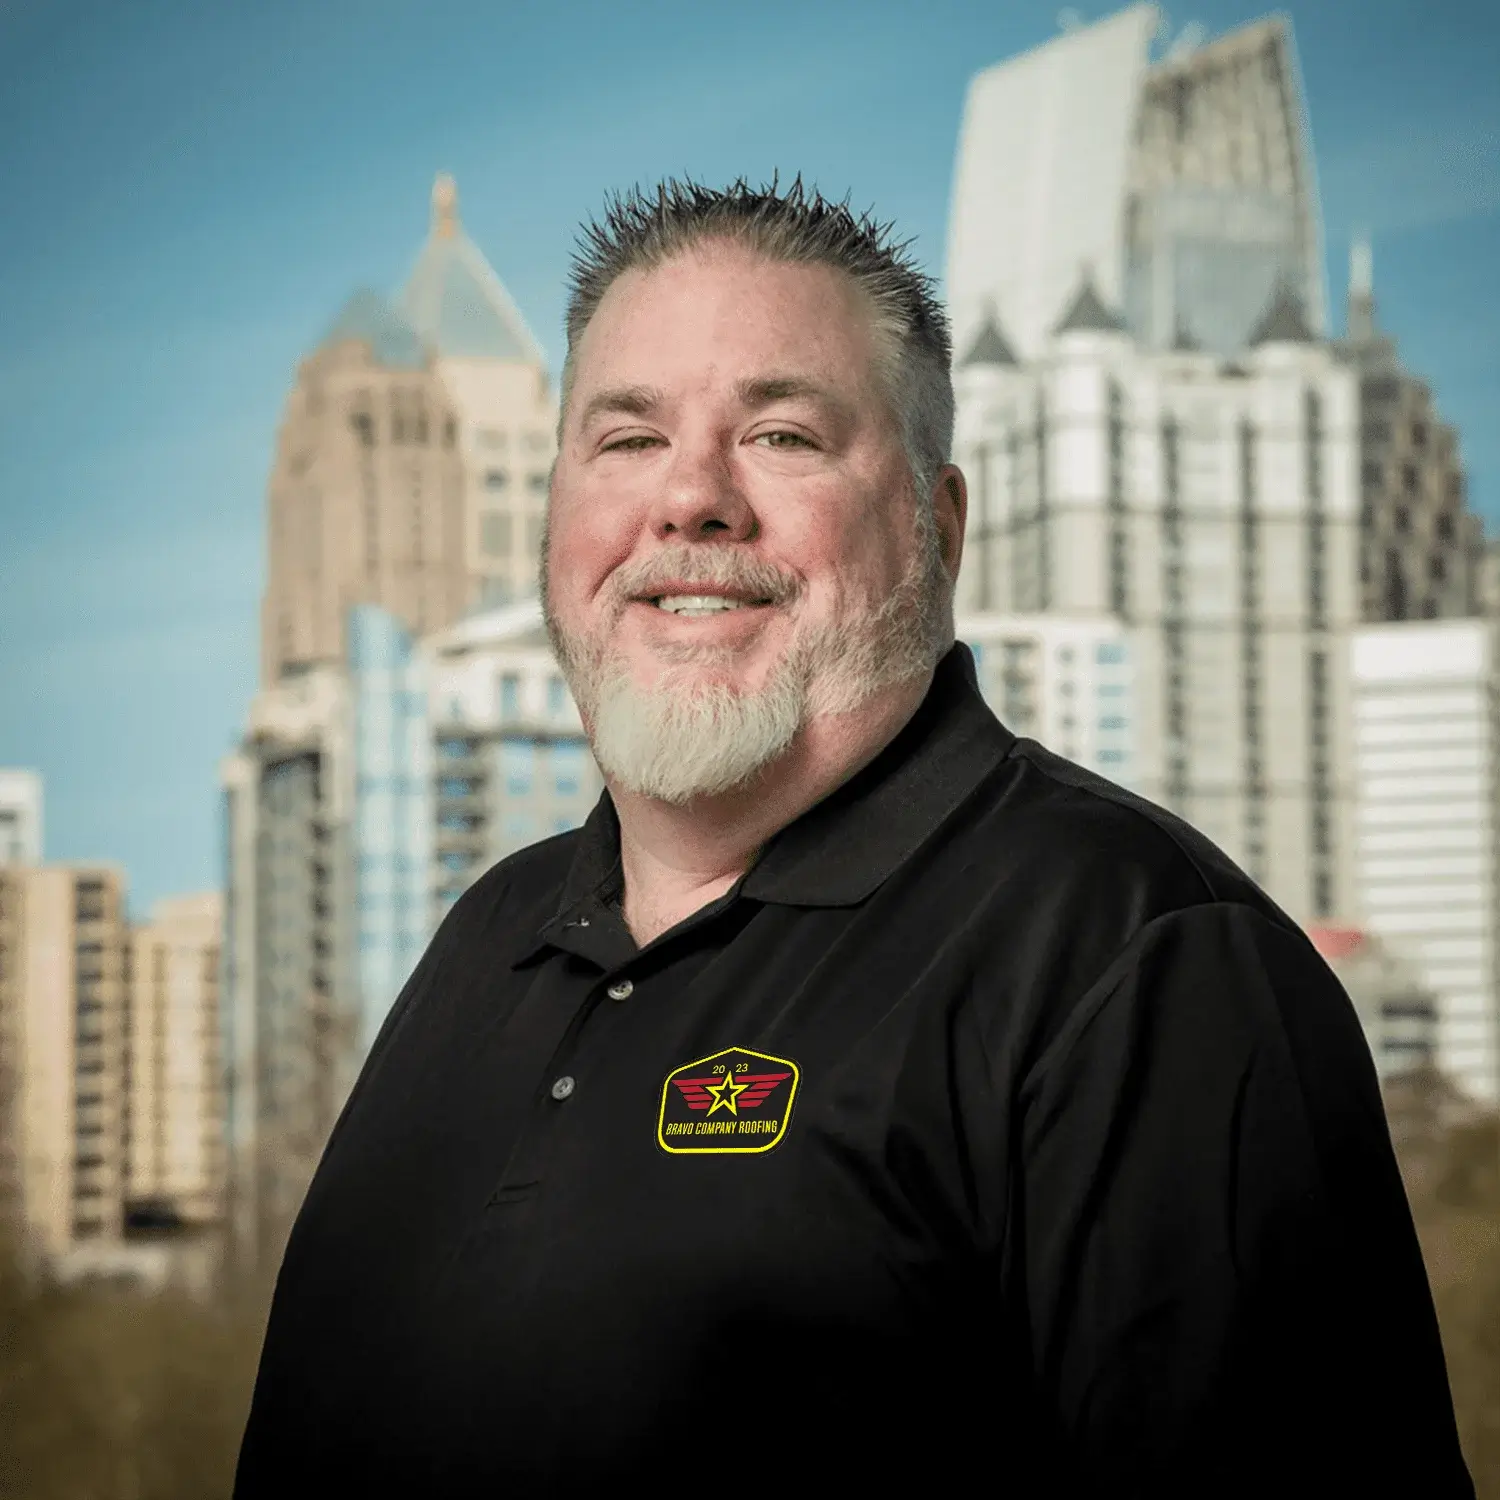 Chris Turner the manager of Bravo Company Roofing | About Roofing Company in Atlanta, GA